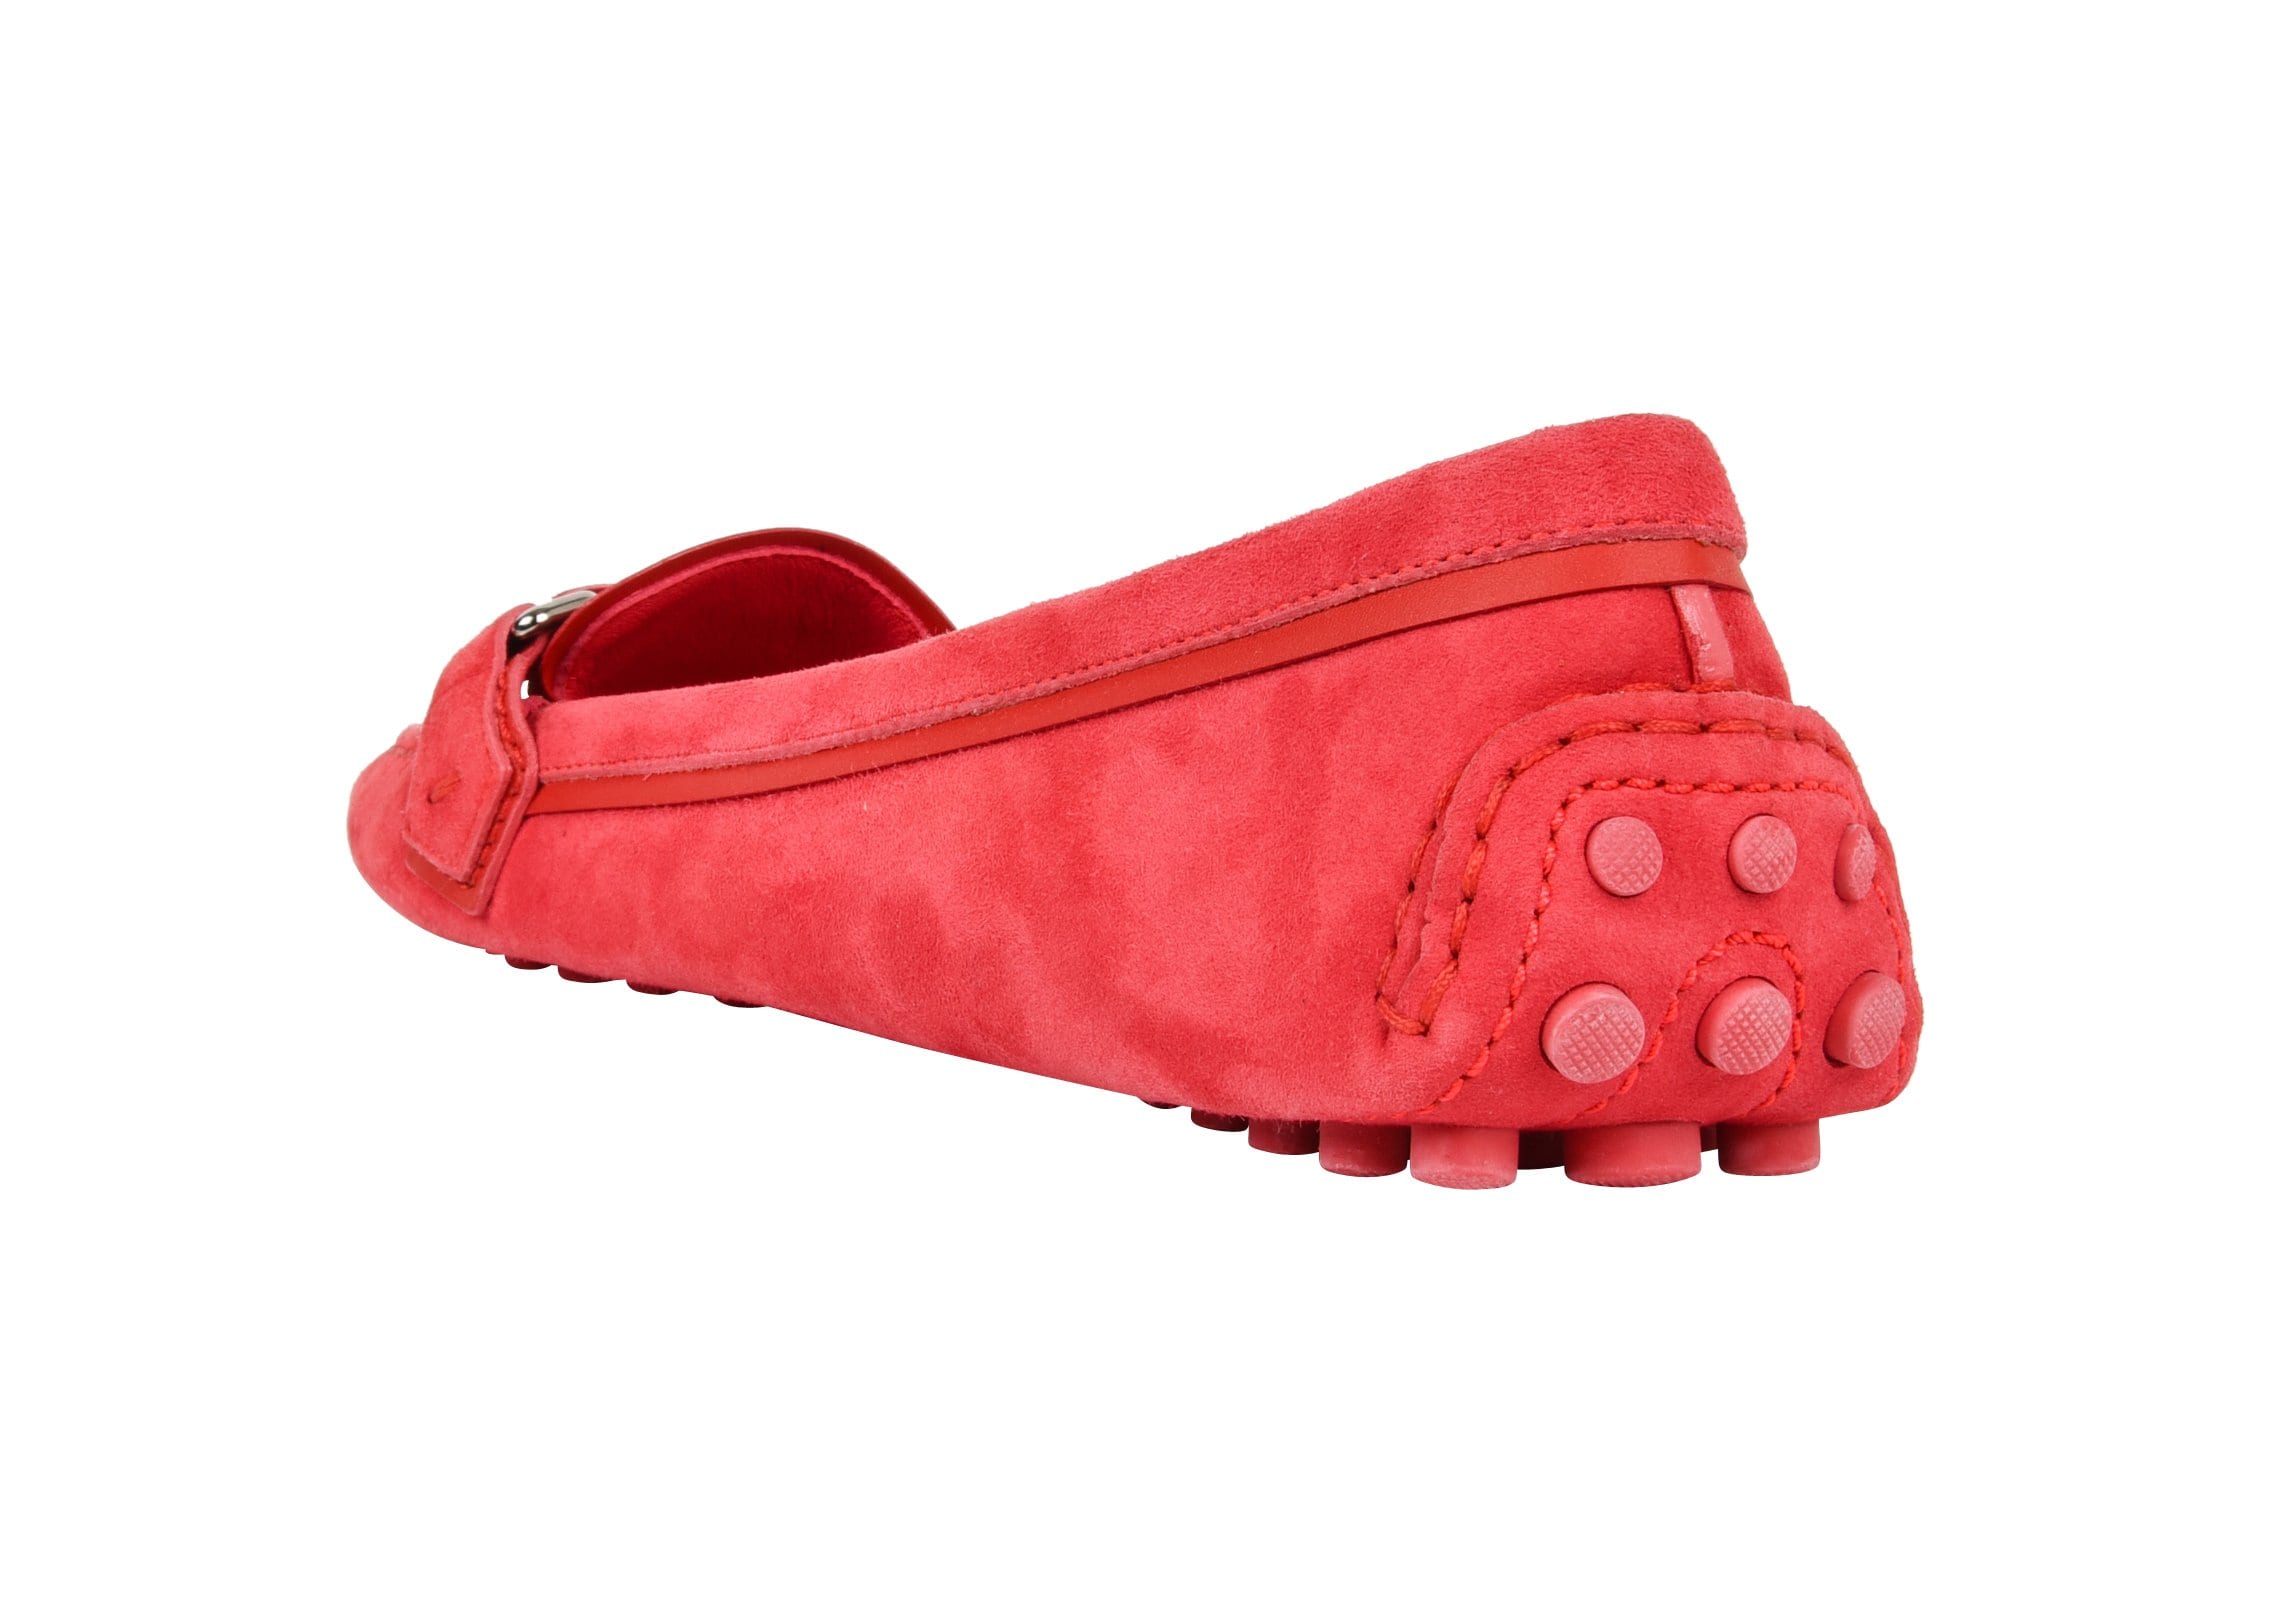 Louis Vuitton Shoe Pink Raspberry Suede Loafer / Driving Shoe 38.5 / 8 –  Mightychic